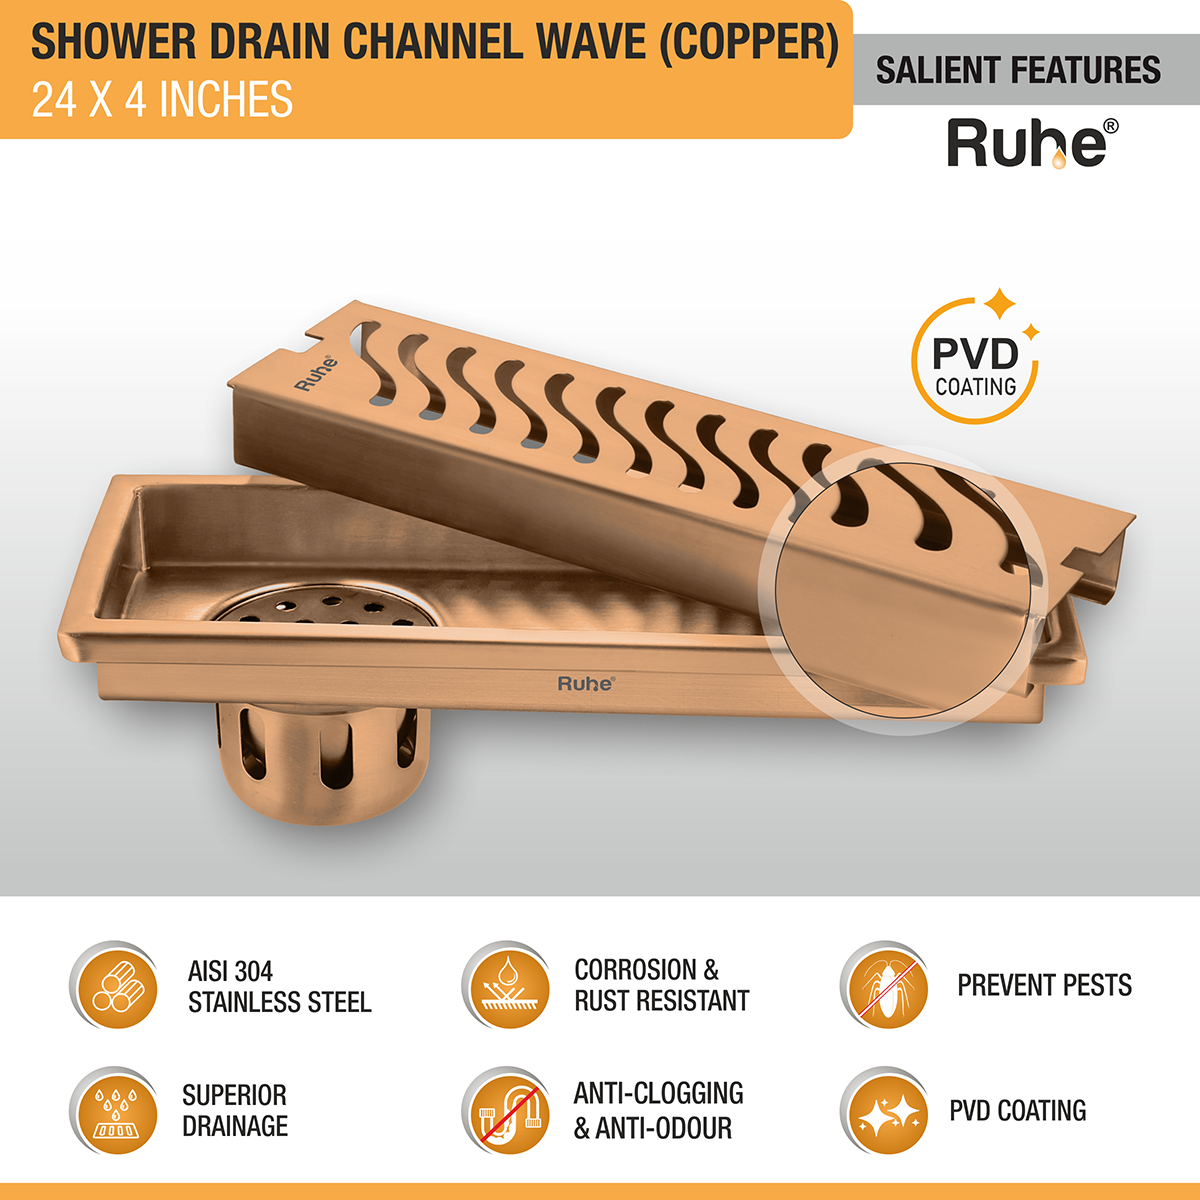 Wave Shower Drain Channel (24 x 4 Inches) ROSE GOLD/ANTIQUE COPPER features